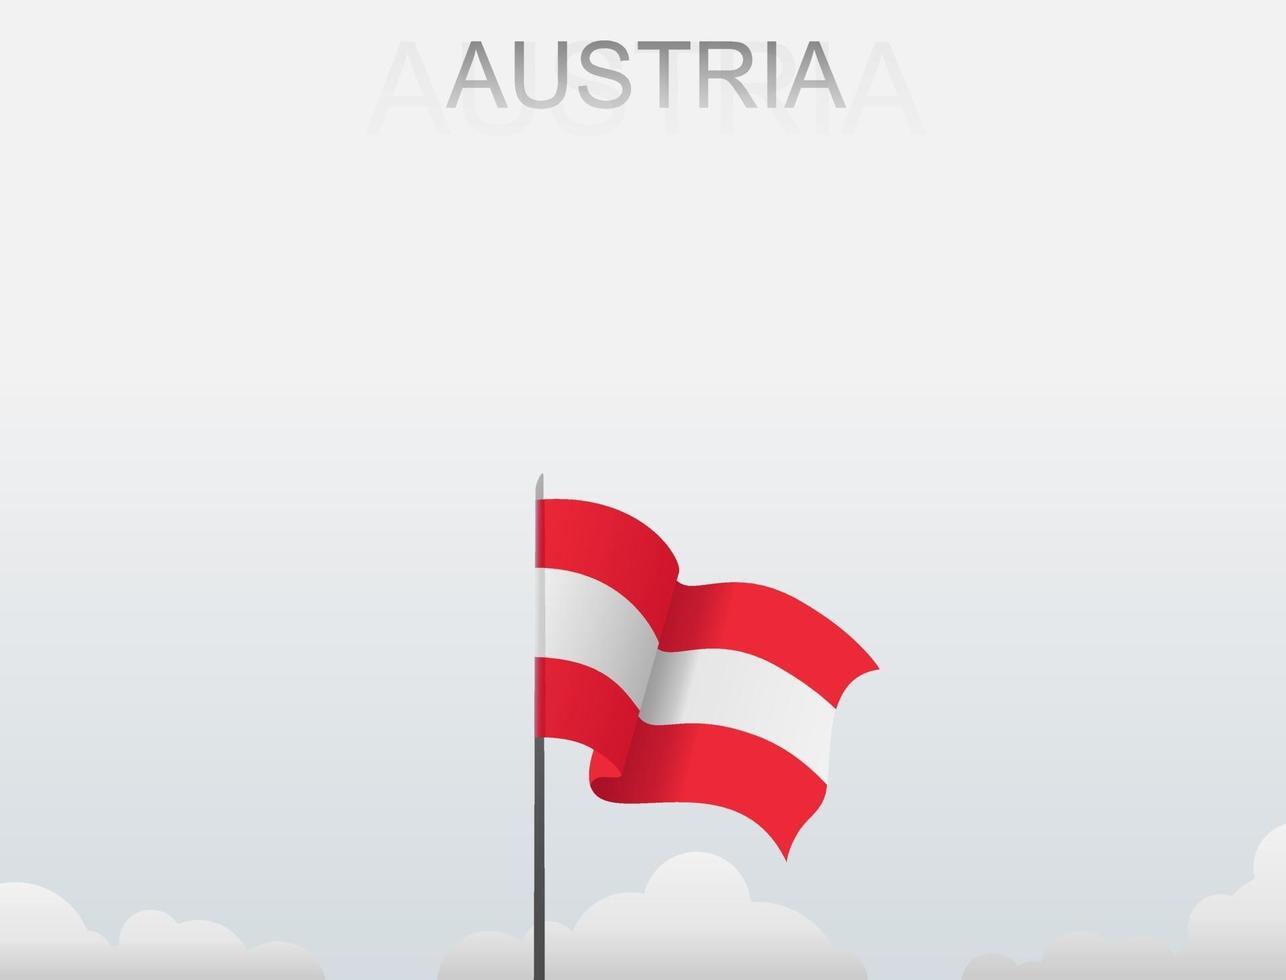 The Austria flag is flying on a pole that stands tall under the white sky vector